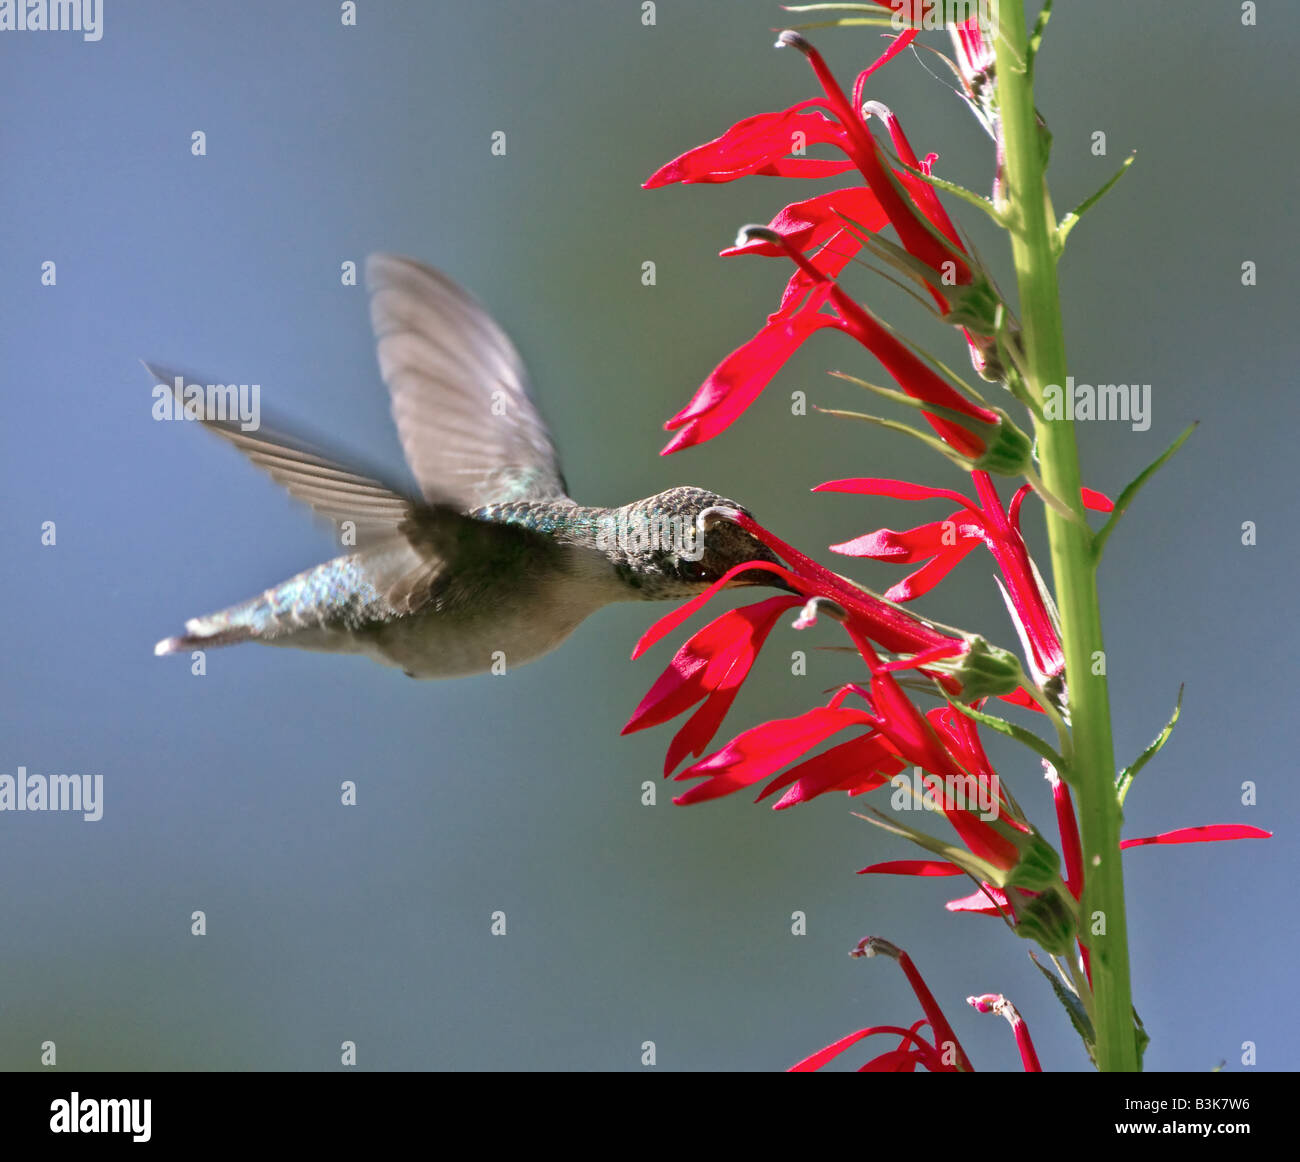 A Ruby-Throated Hummingbird feeding from red Penstemon flowers on a summers day. Stock Photo